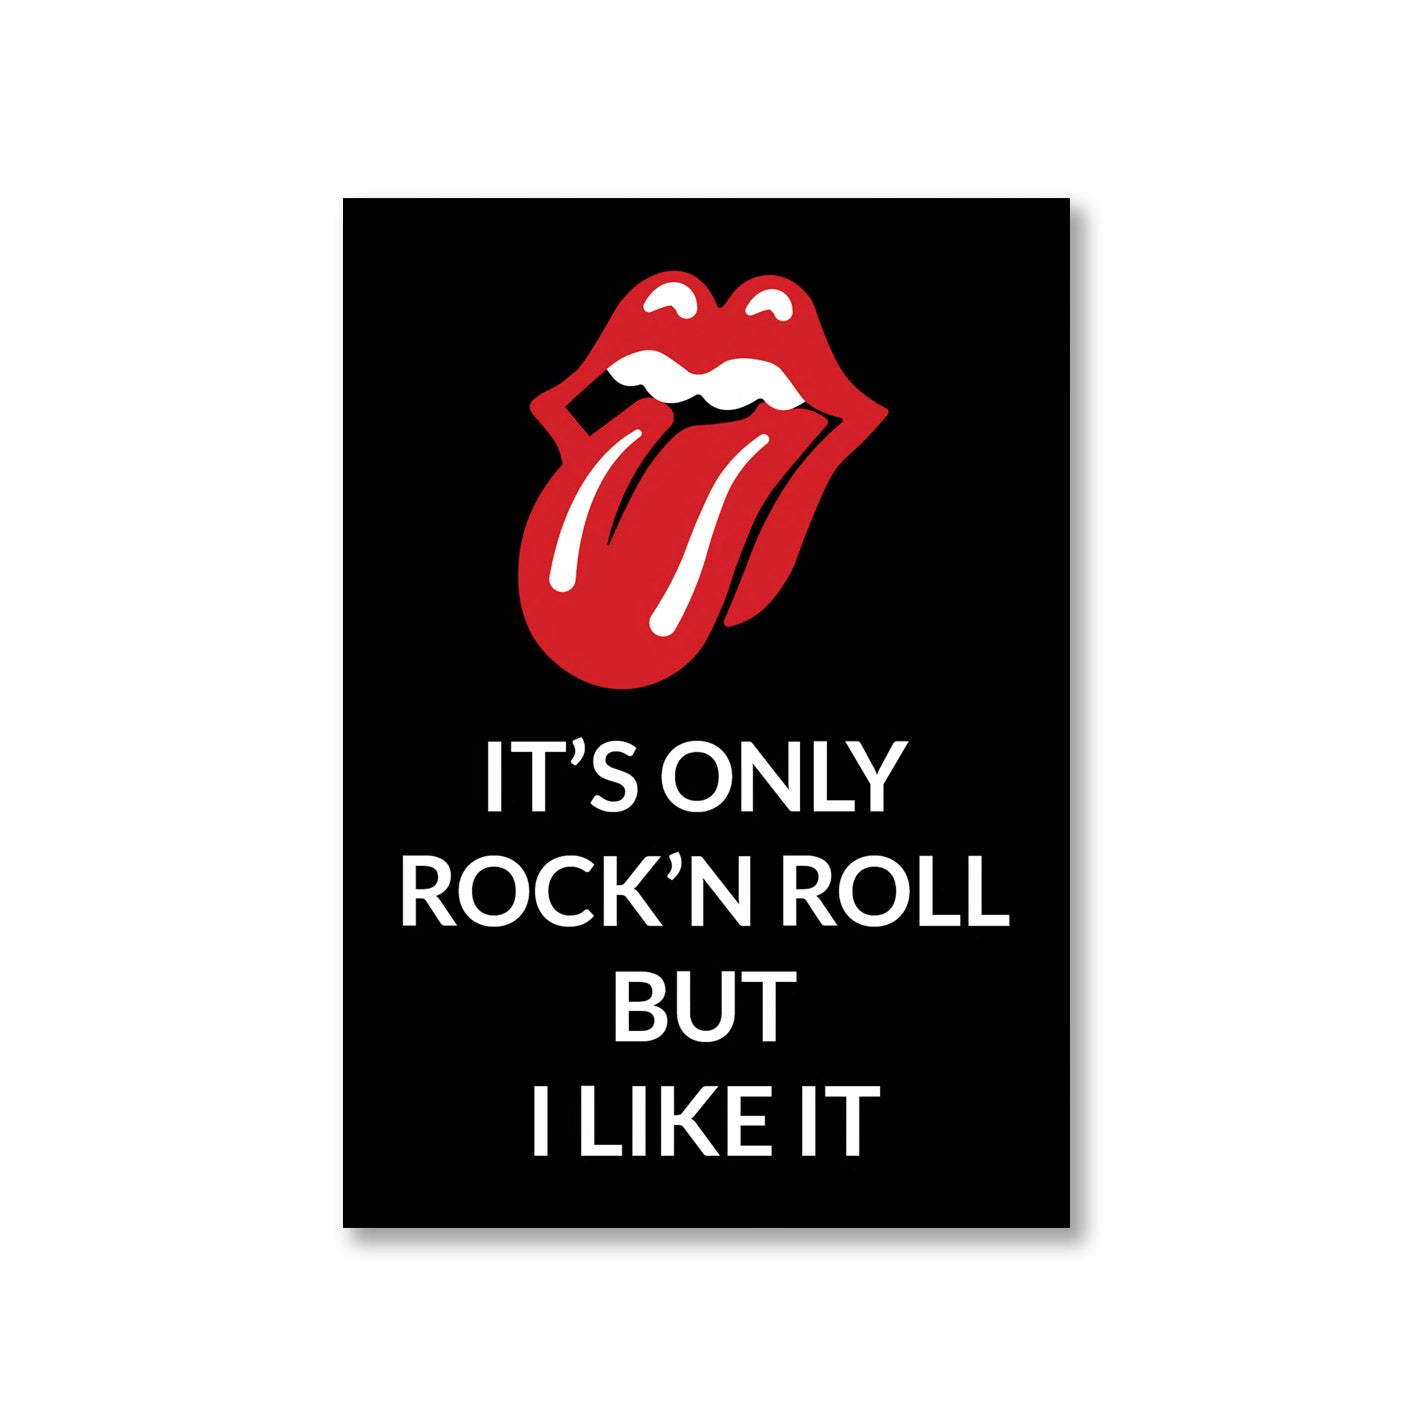 the rolling stones rock 'n roll  poster wall art buy online united states of america usa the banyan tee tbt a4